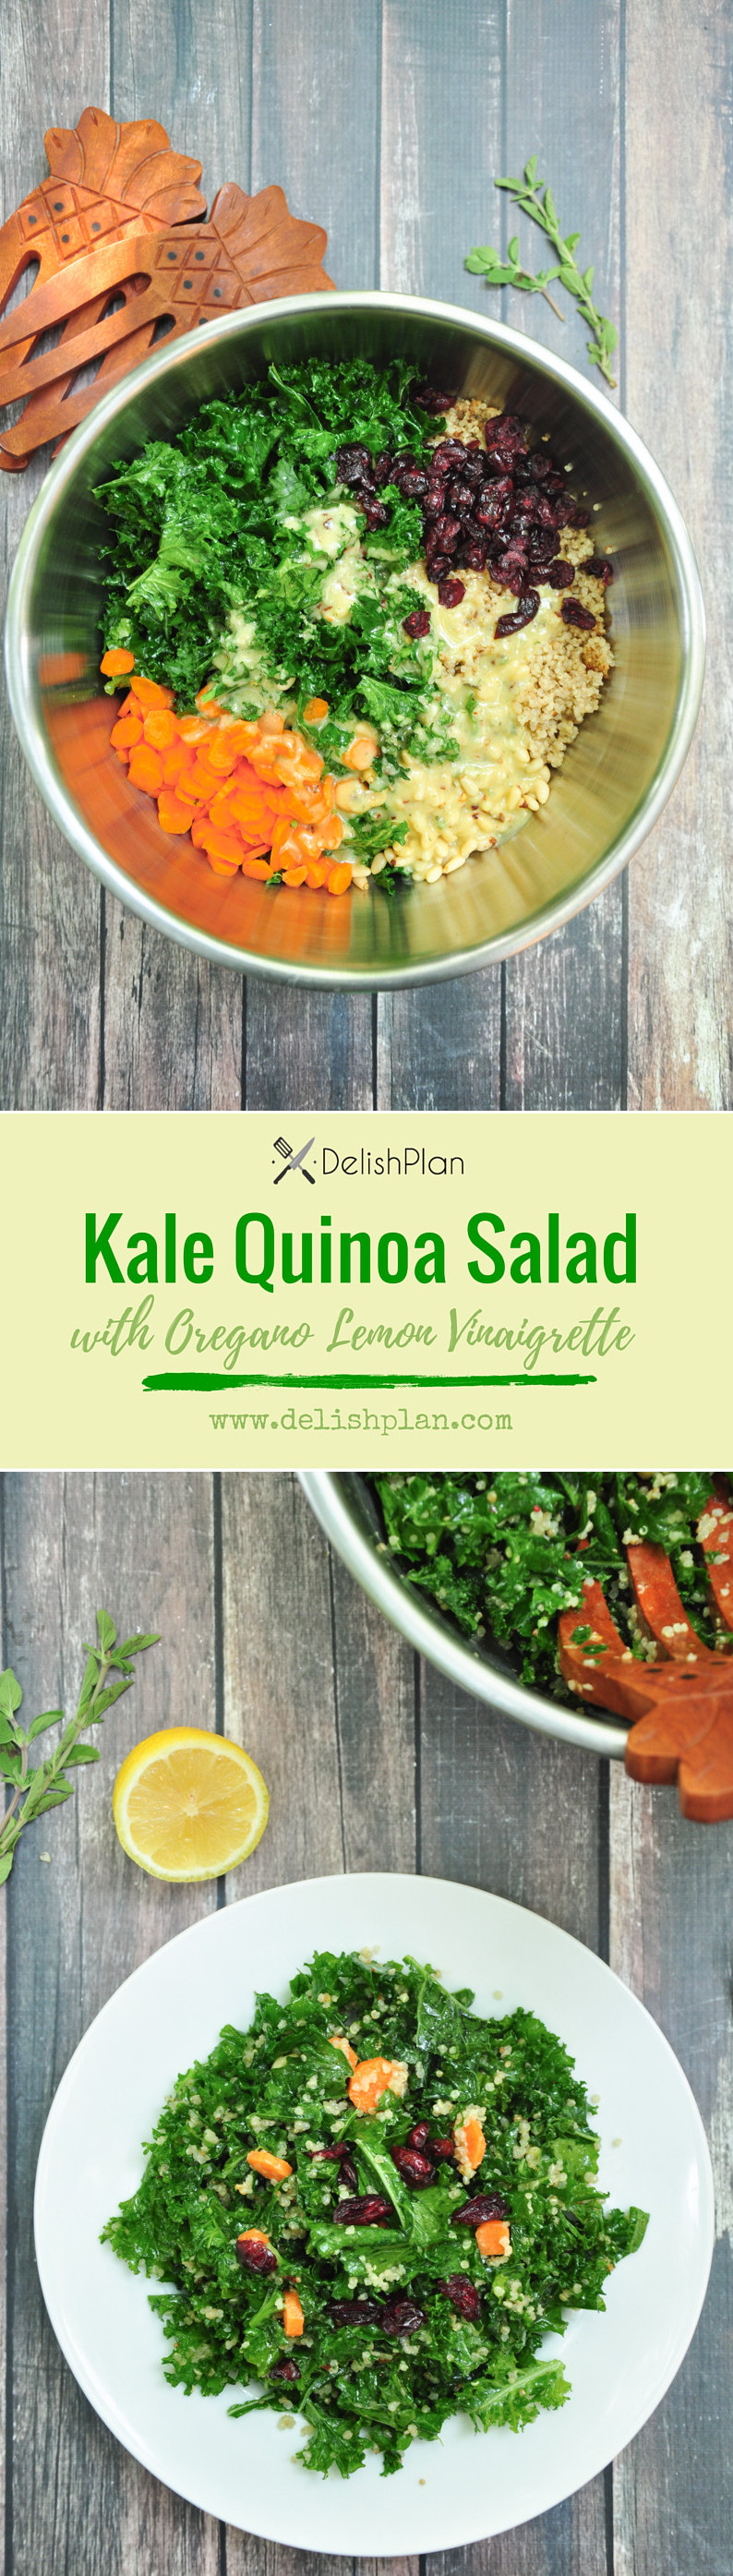 Kale, quinoa, carrots, pine nuts and dried cranberries tossed in a delightful oregano lemon vinaigrette. This Kale Quinoa Salad is gluten free and vegan.